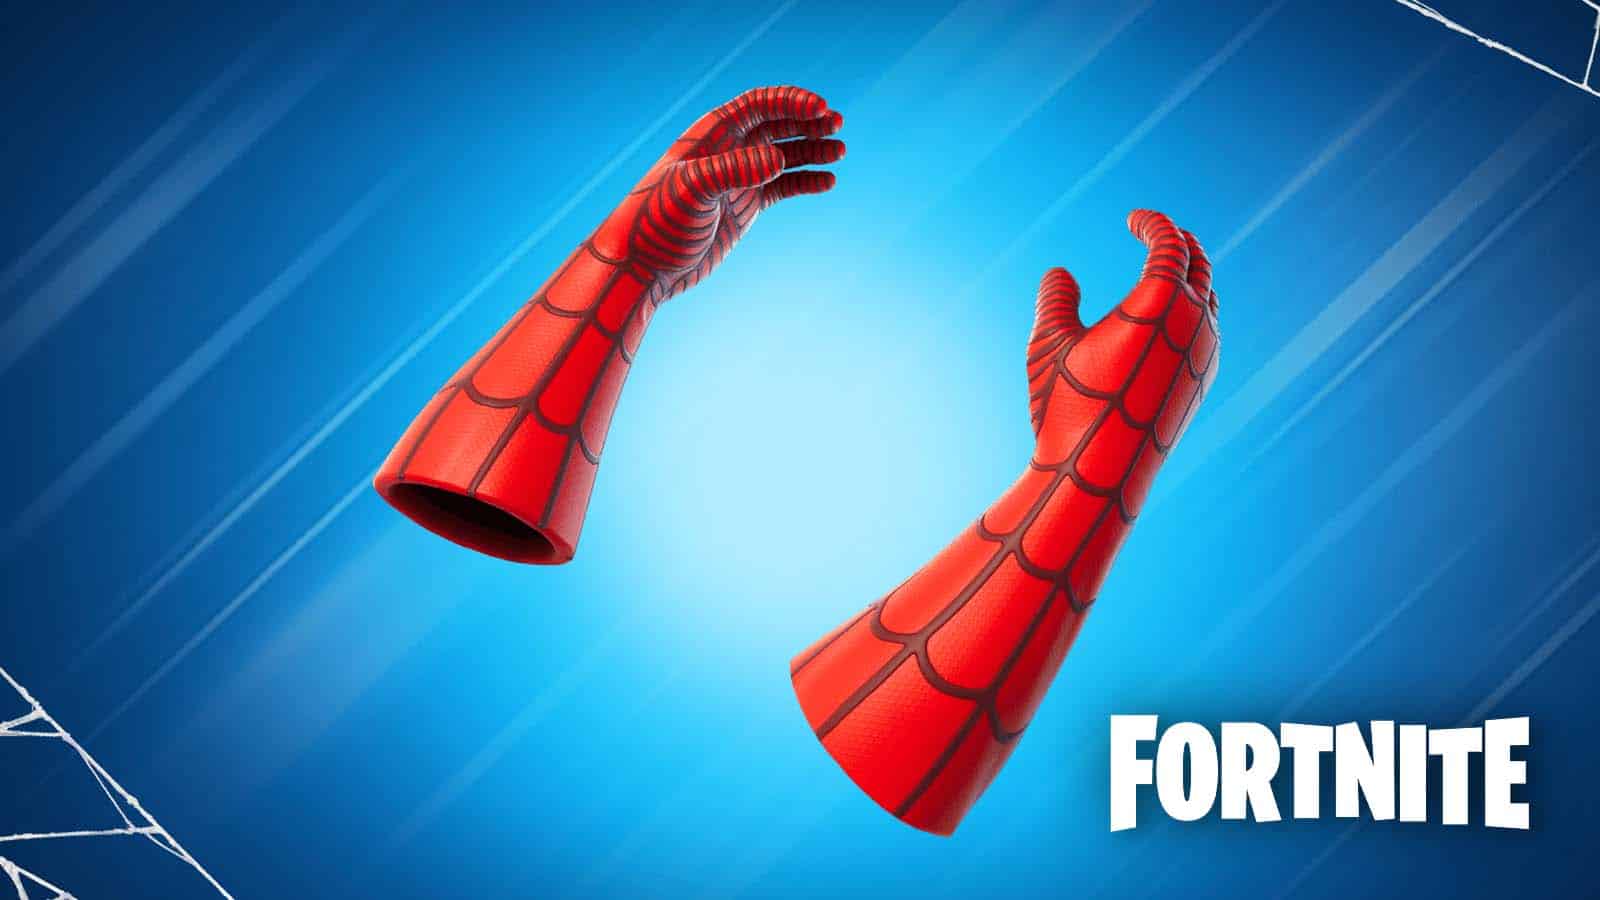 Spider-Man's Web-Shooters